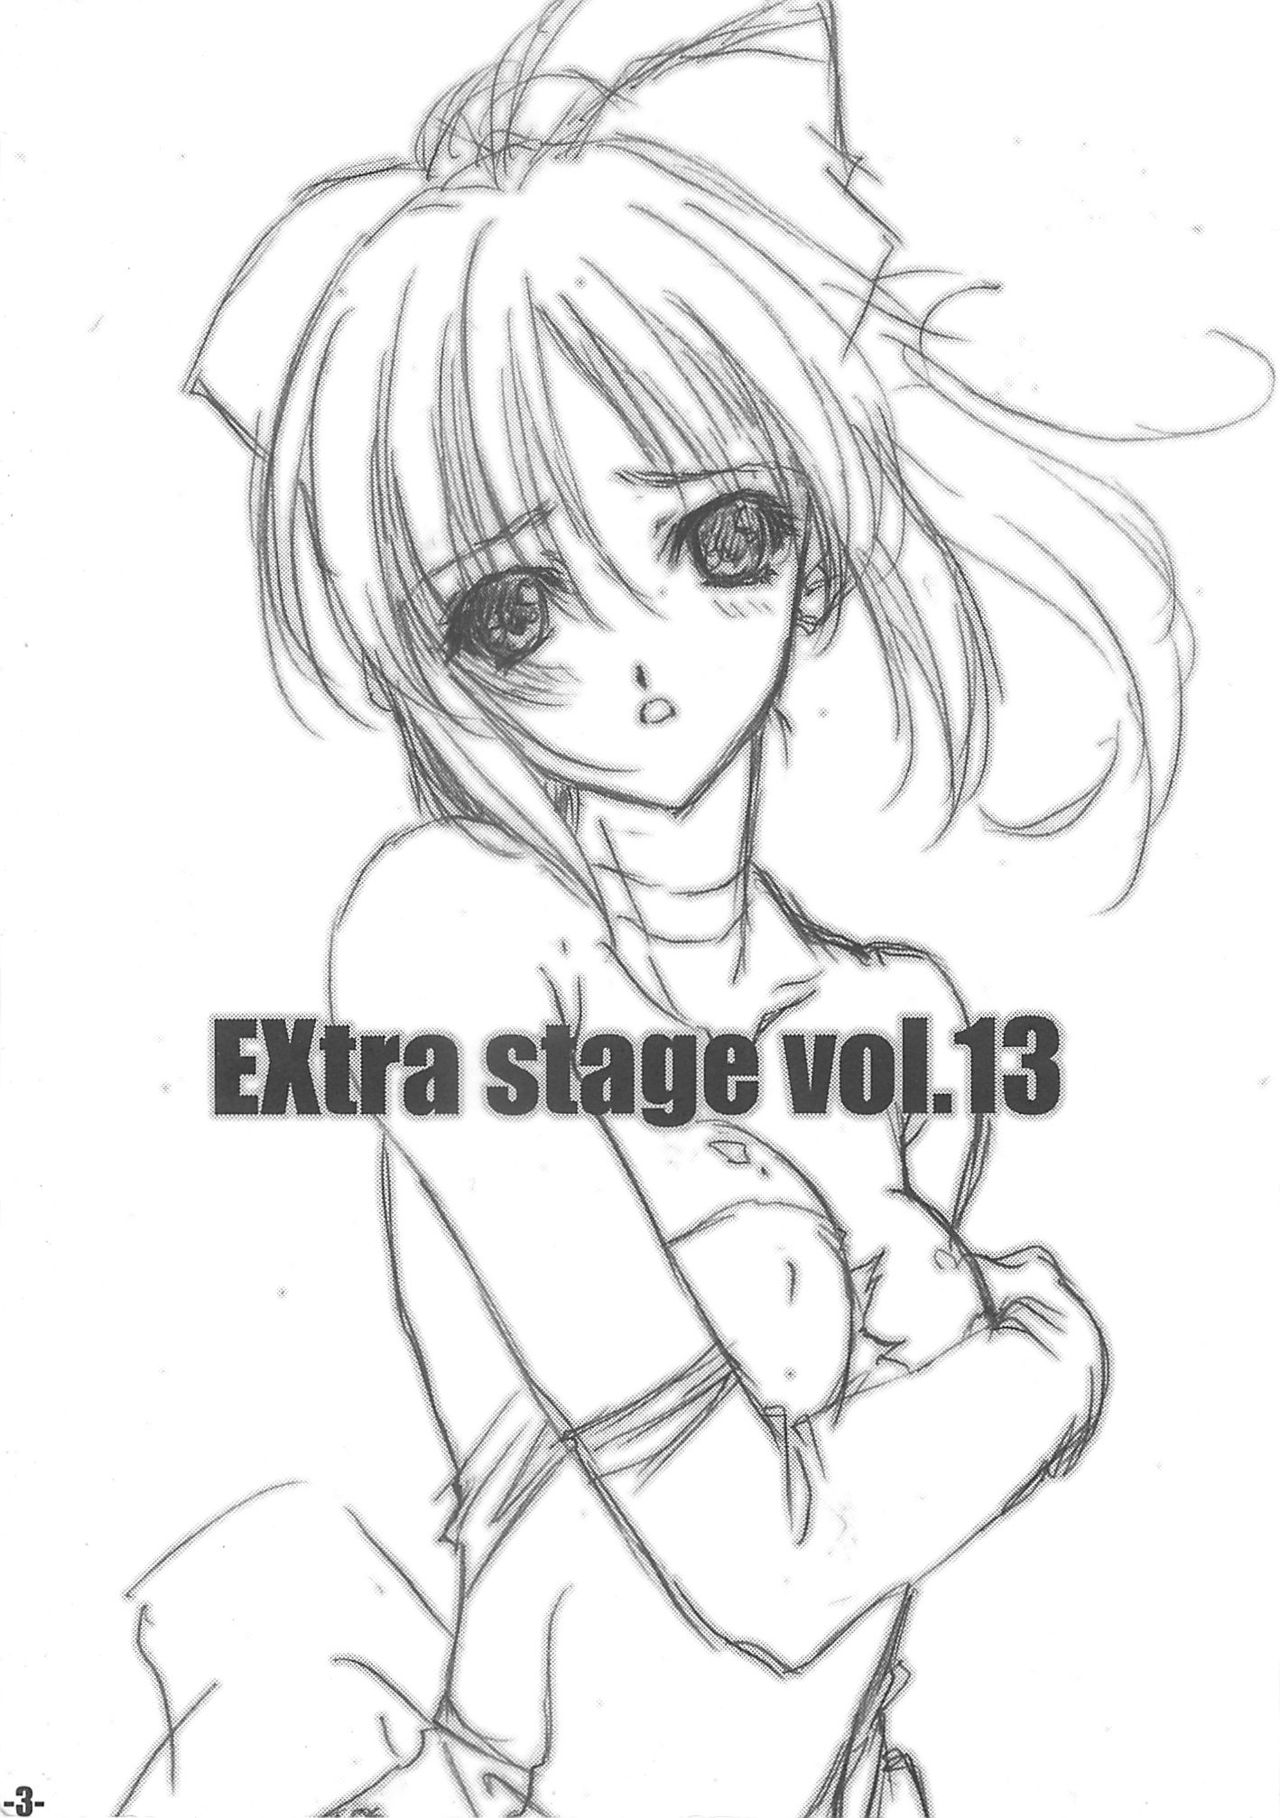 (Cレヴォ35) [EXtage (水上広樹)] EXtra stage vol.13 (Fate/stay night) [英訳]